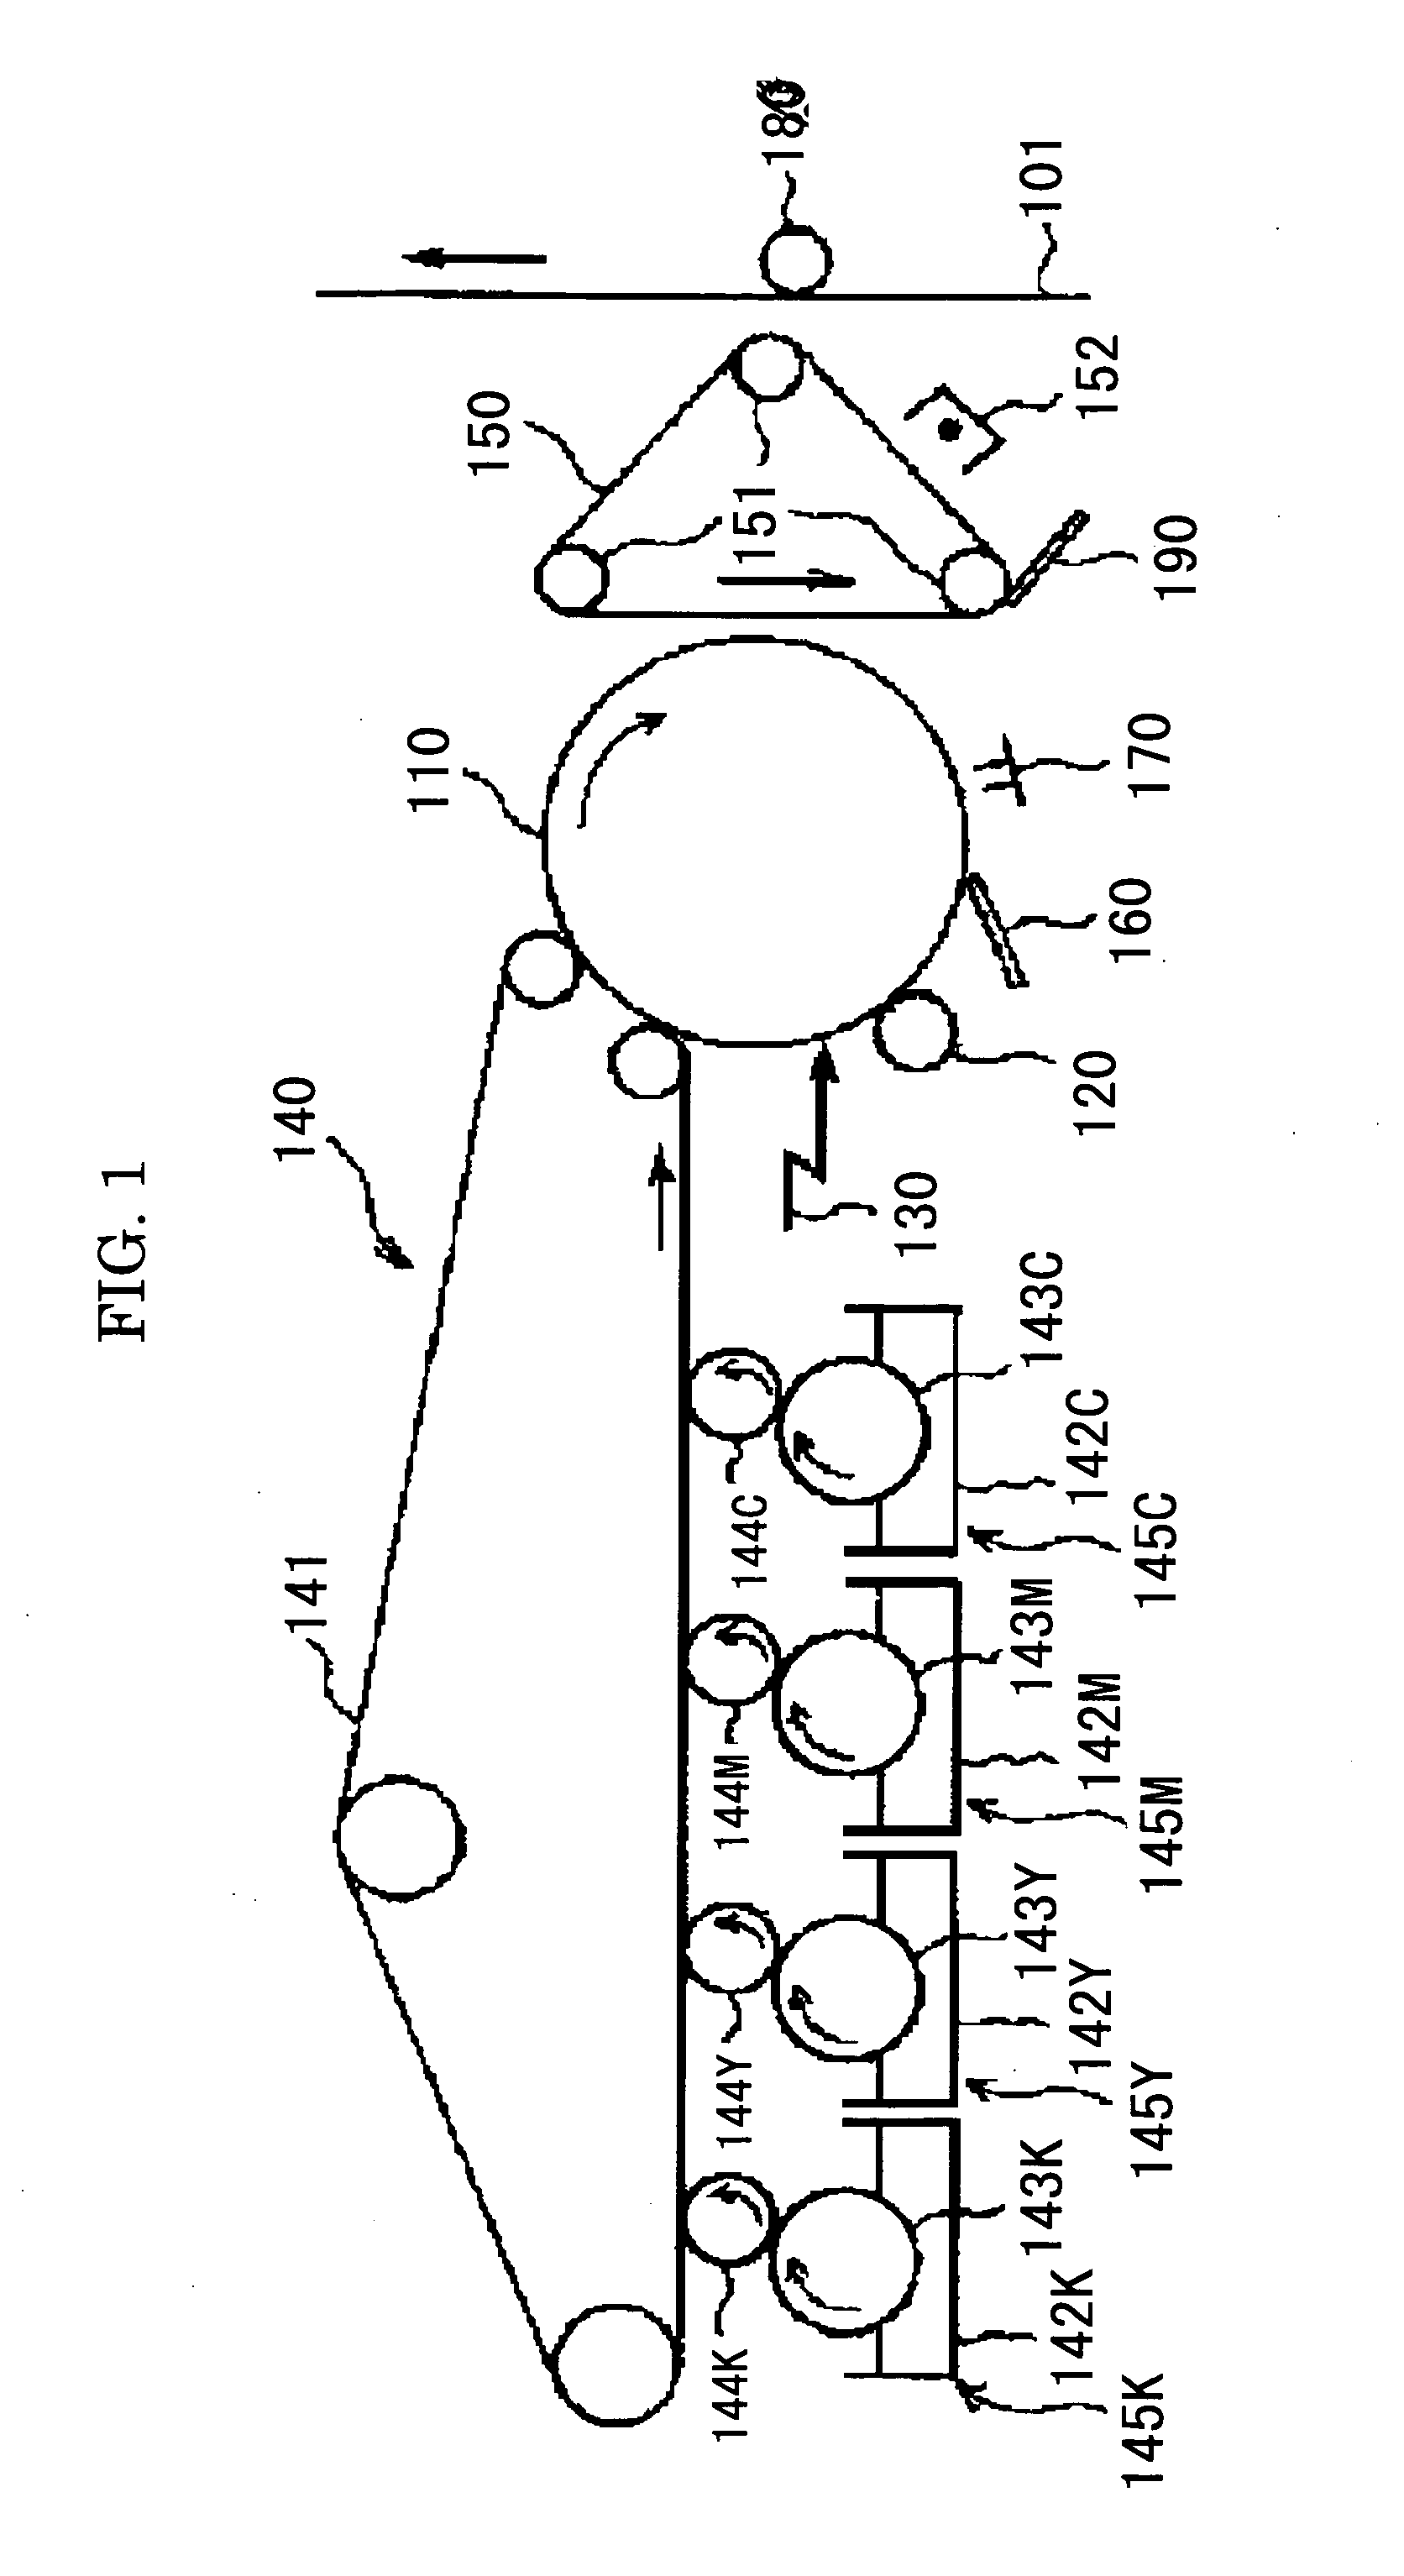 Electrophotography and image forming apparatus